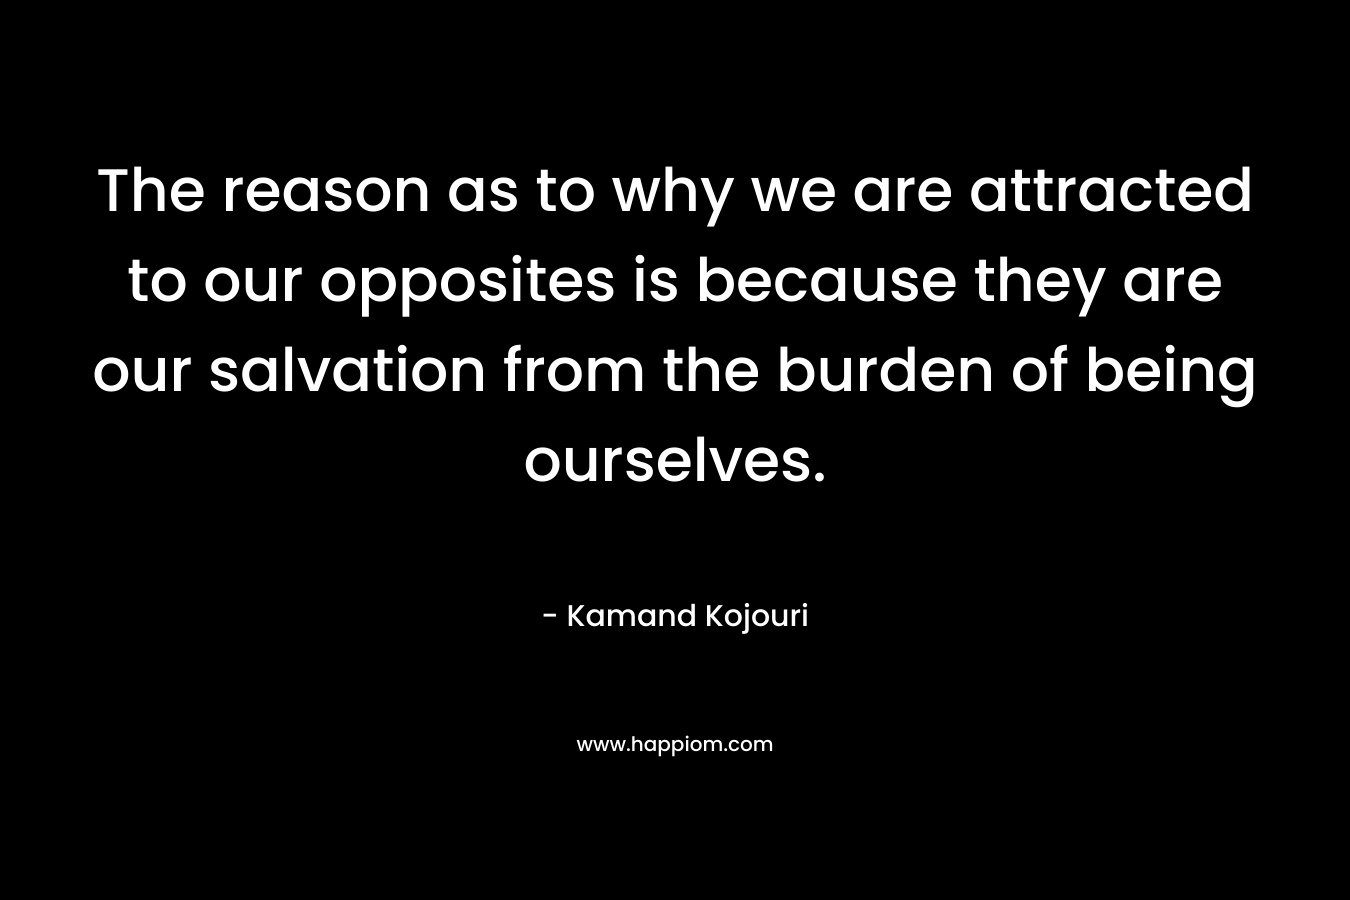 The reason as to why we are attracted to our opposites is because they are our salvation from the burden of being ourselves.